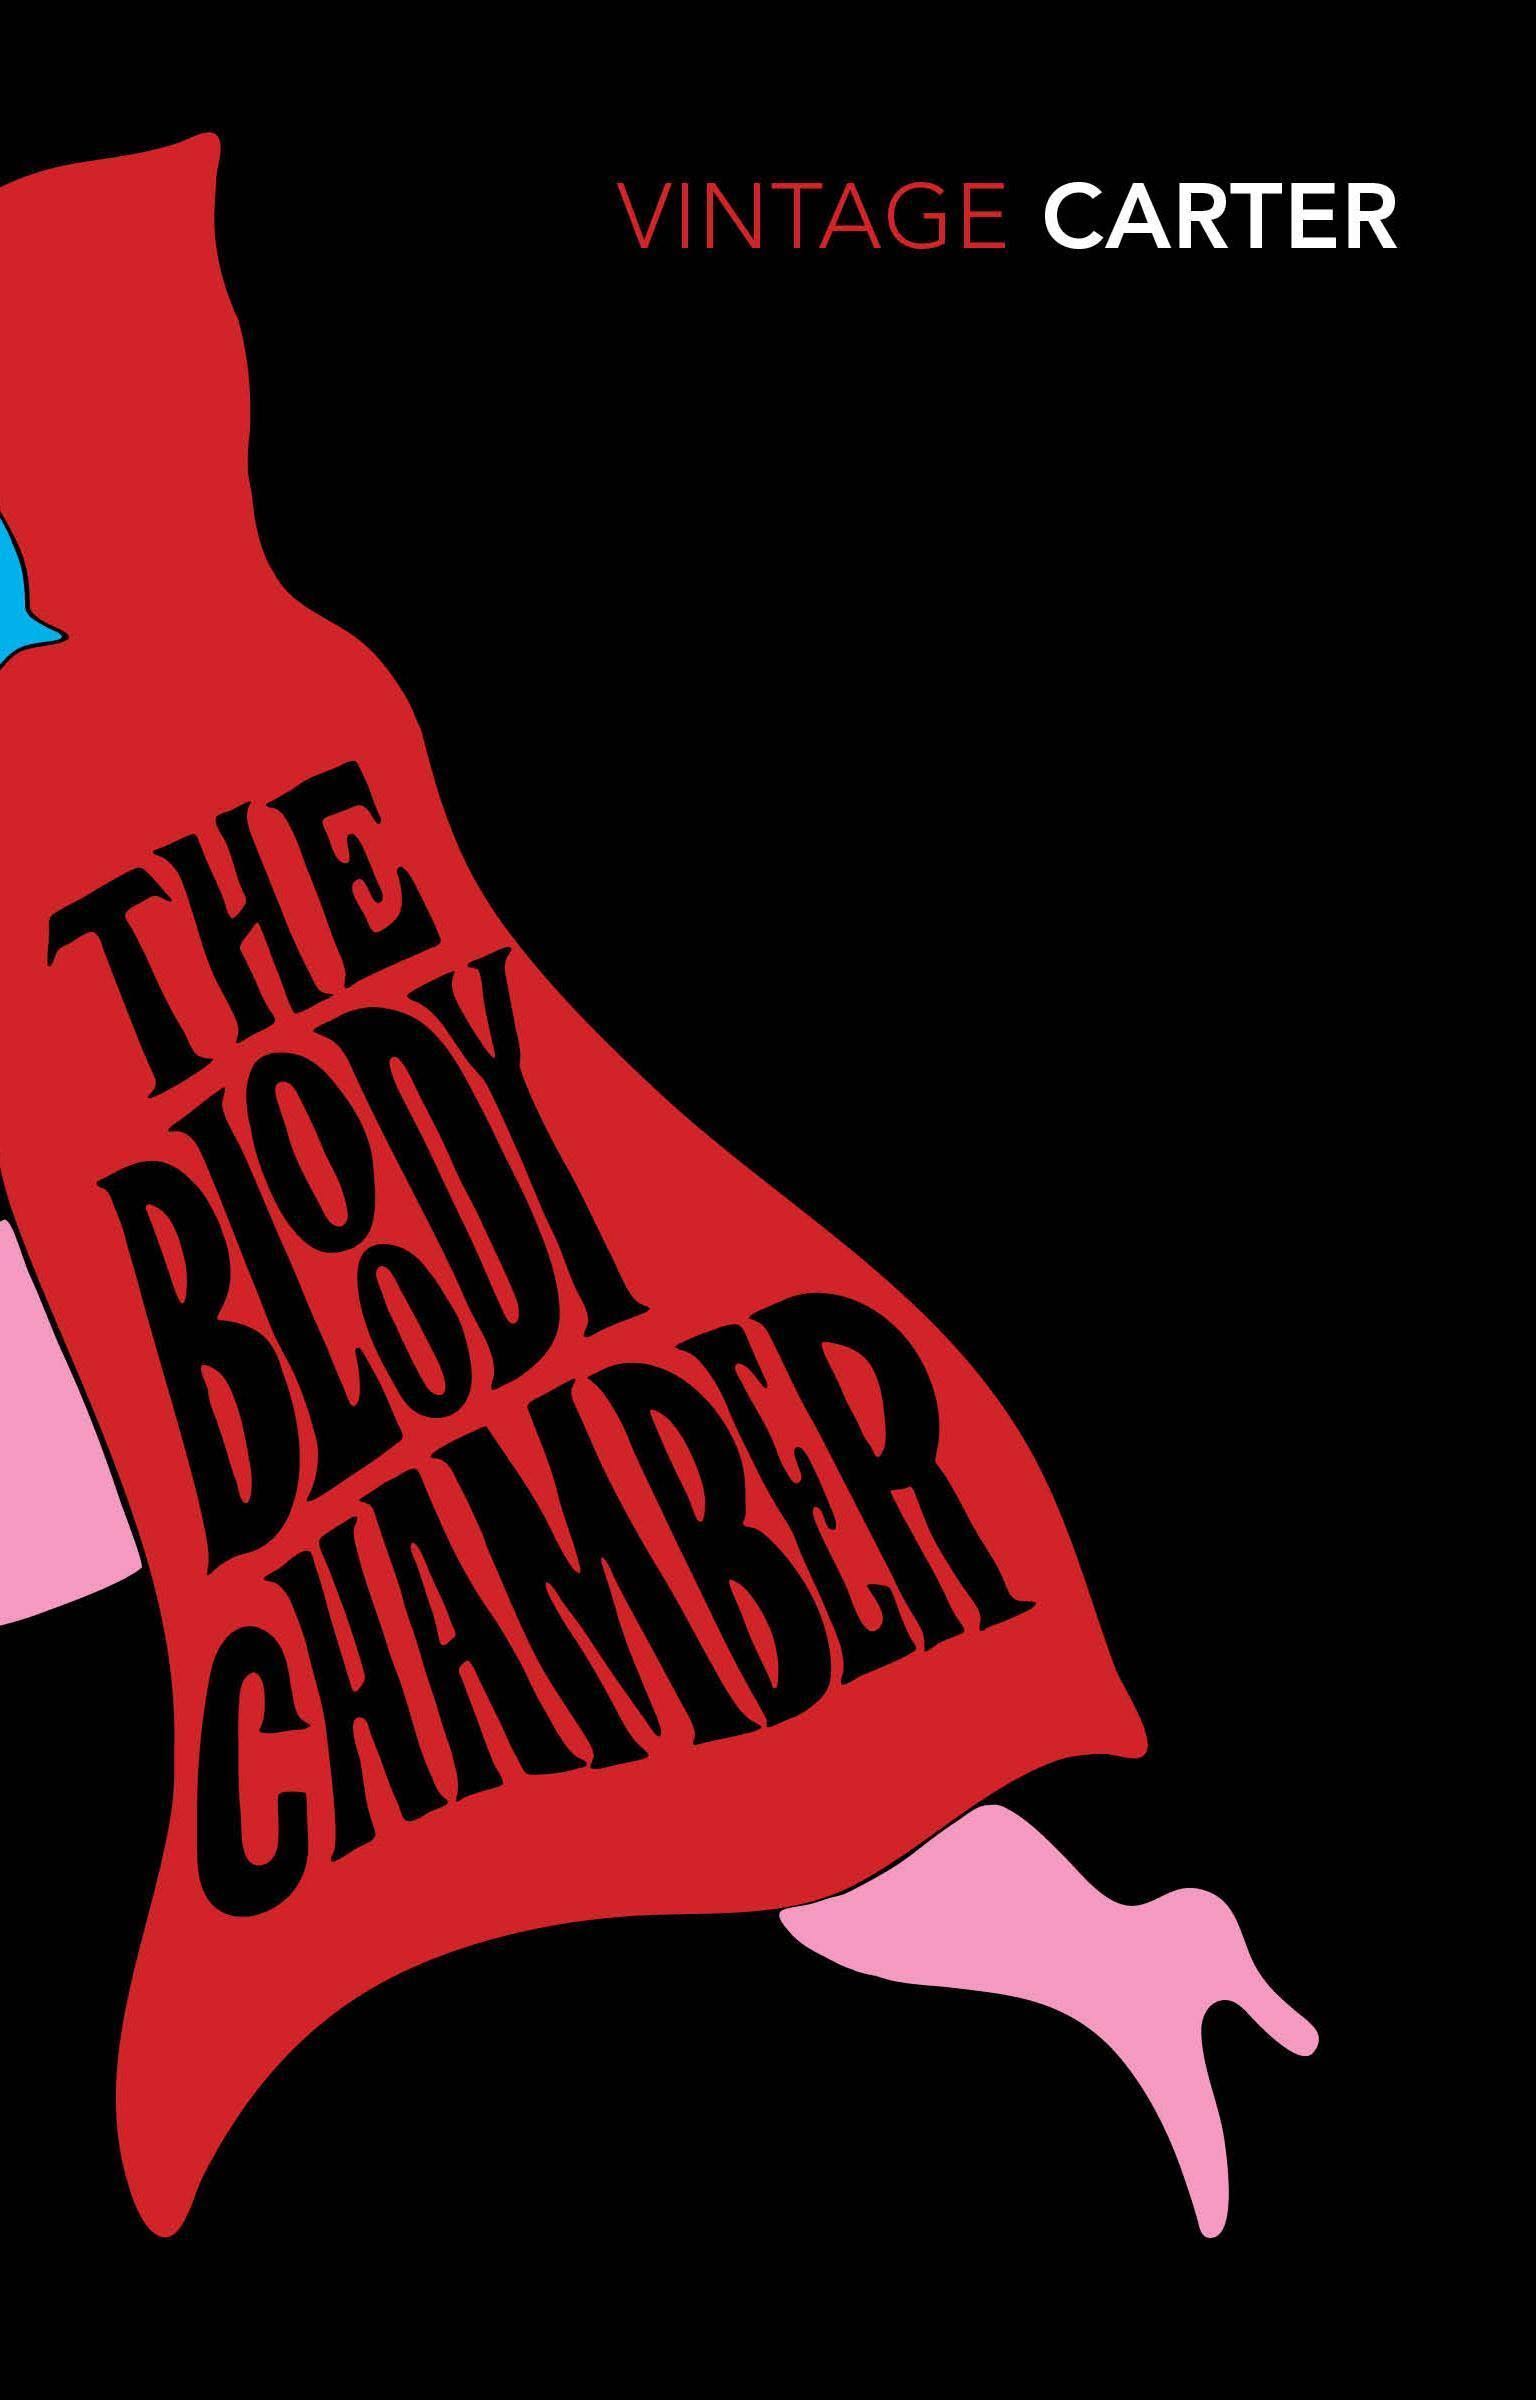 The Bloody Chamber and Other Stories [Book]